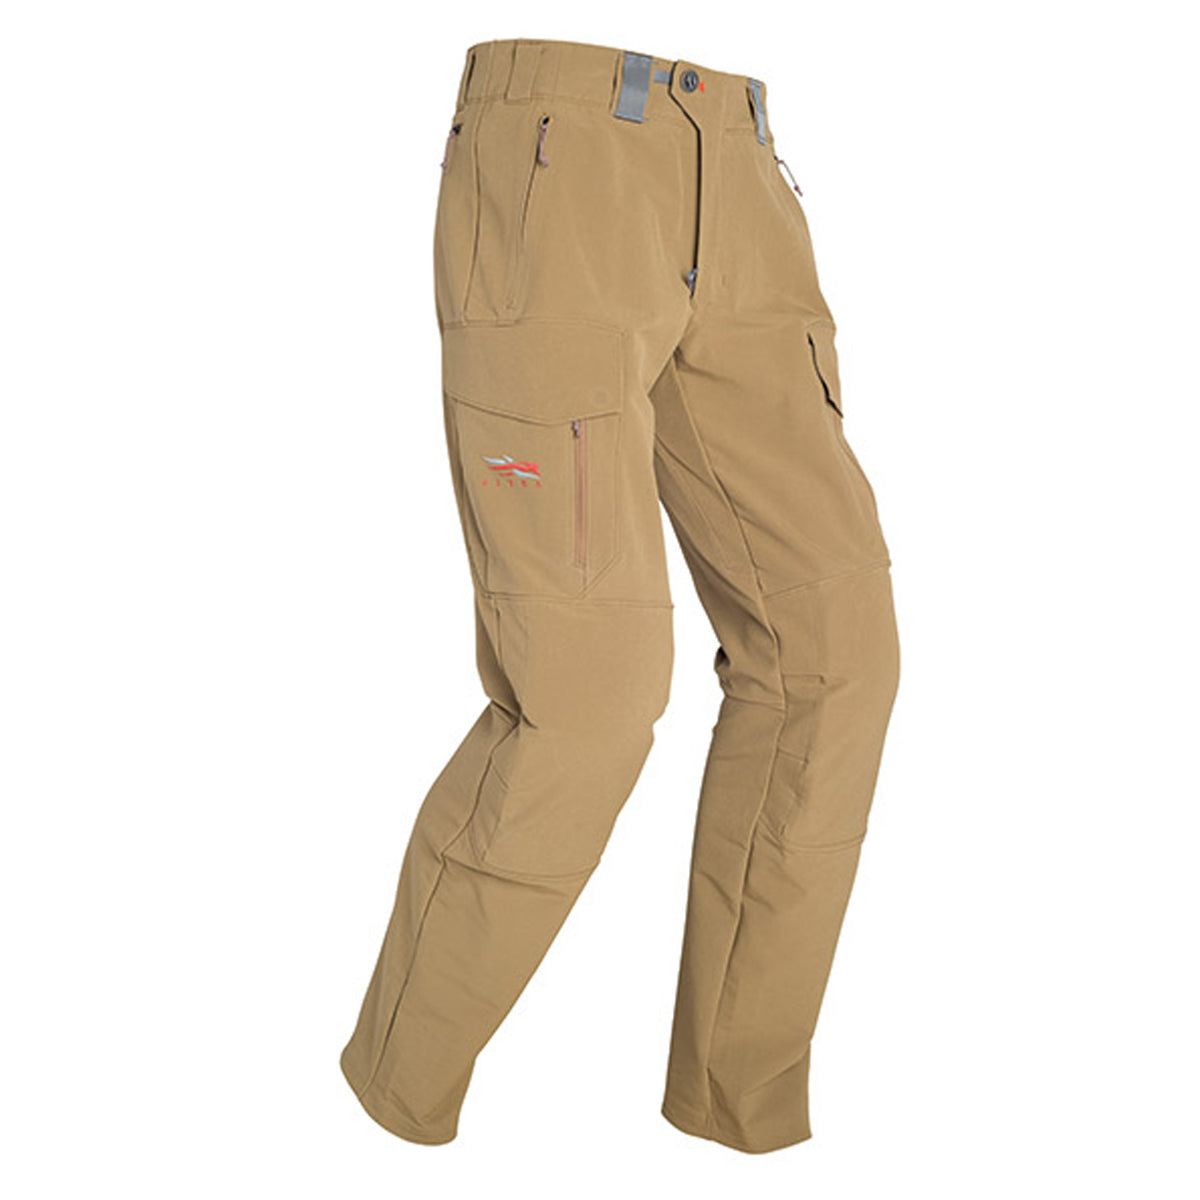 Sitka Mountain Pant in Sitka Mountain Pant by Sitka | Apparel - goHUNT Shop by GOHUNT | Sitka - GOHUNT Shop